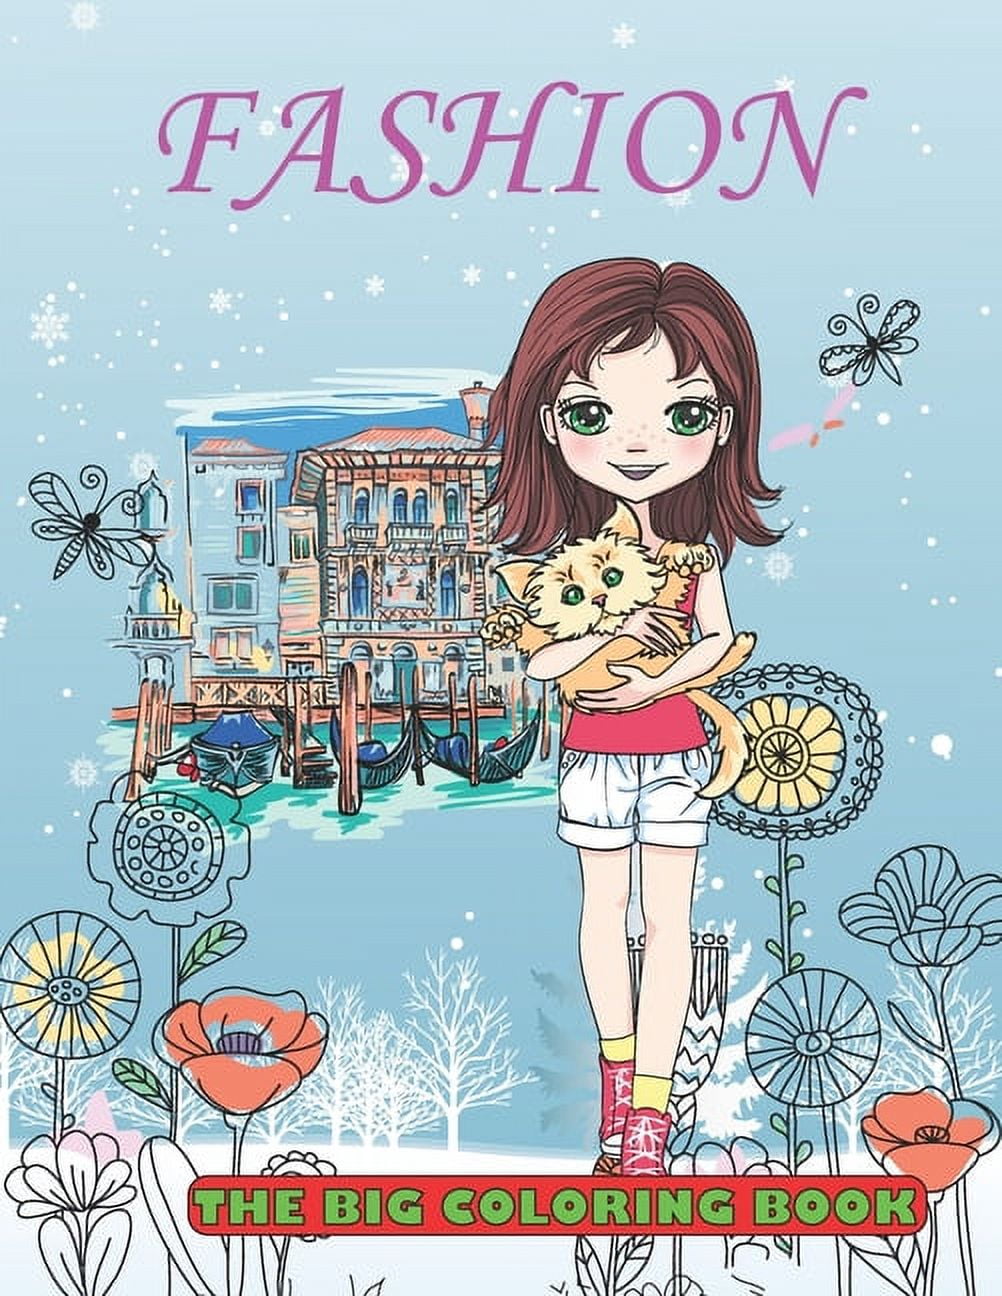 FASHION The Big Coloring Book: My Favorite Colouring Book / Fun Stylish & Beauty Show / Cute and Fresh Styles for Young Girls Women & Adults / + 50 Pages to Color in / My Perfect Wife Gift / Clothing Cool Cute Designs / ( Pretty Since Forever Books ) [Book]